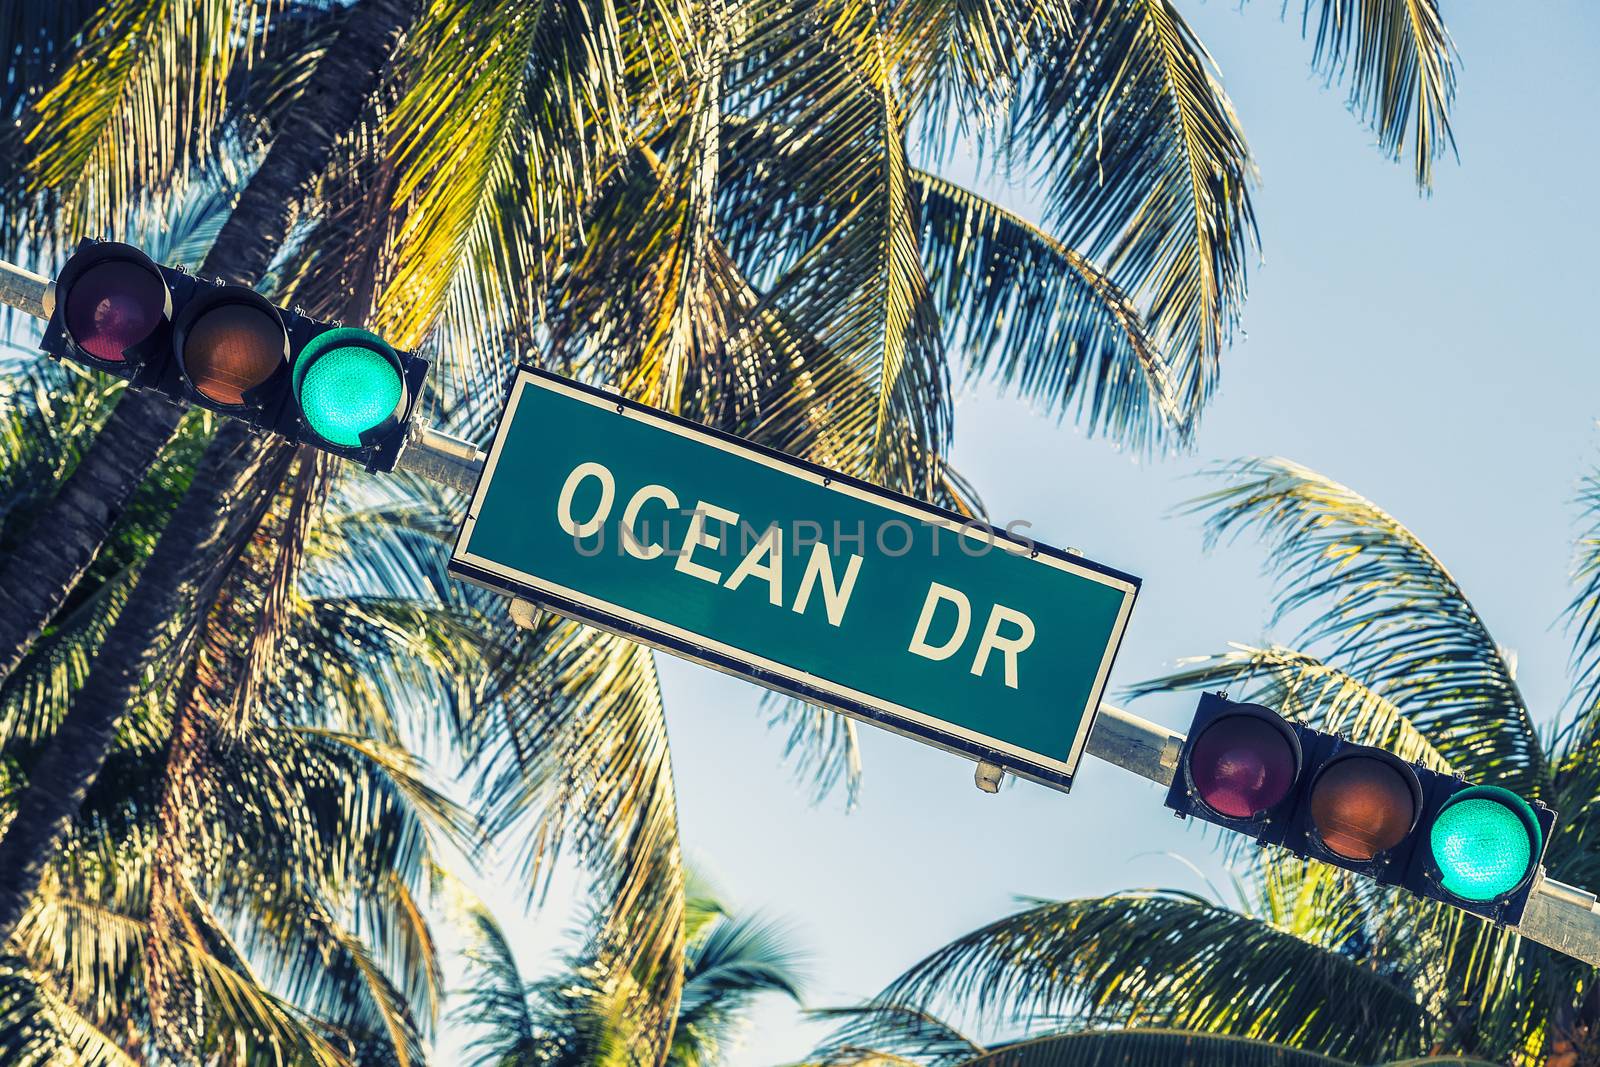 Ocean drive sign by vwalakte